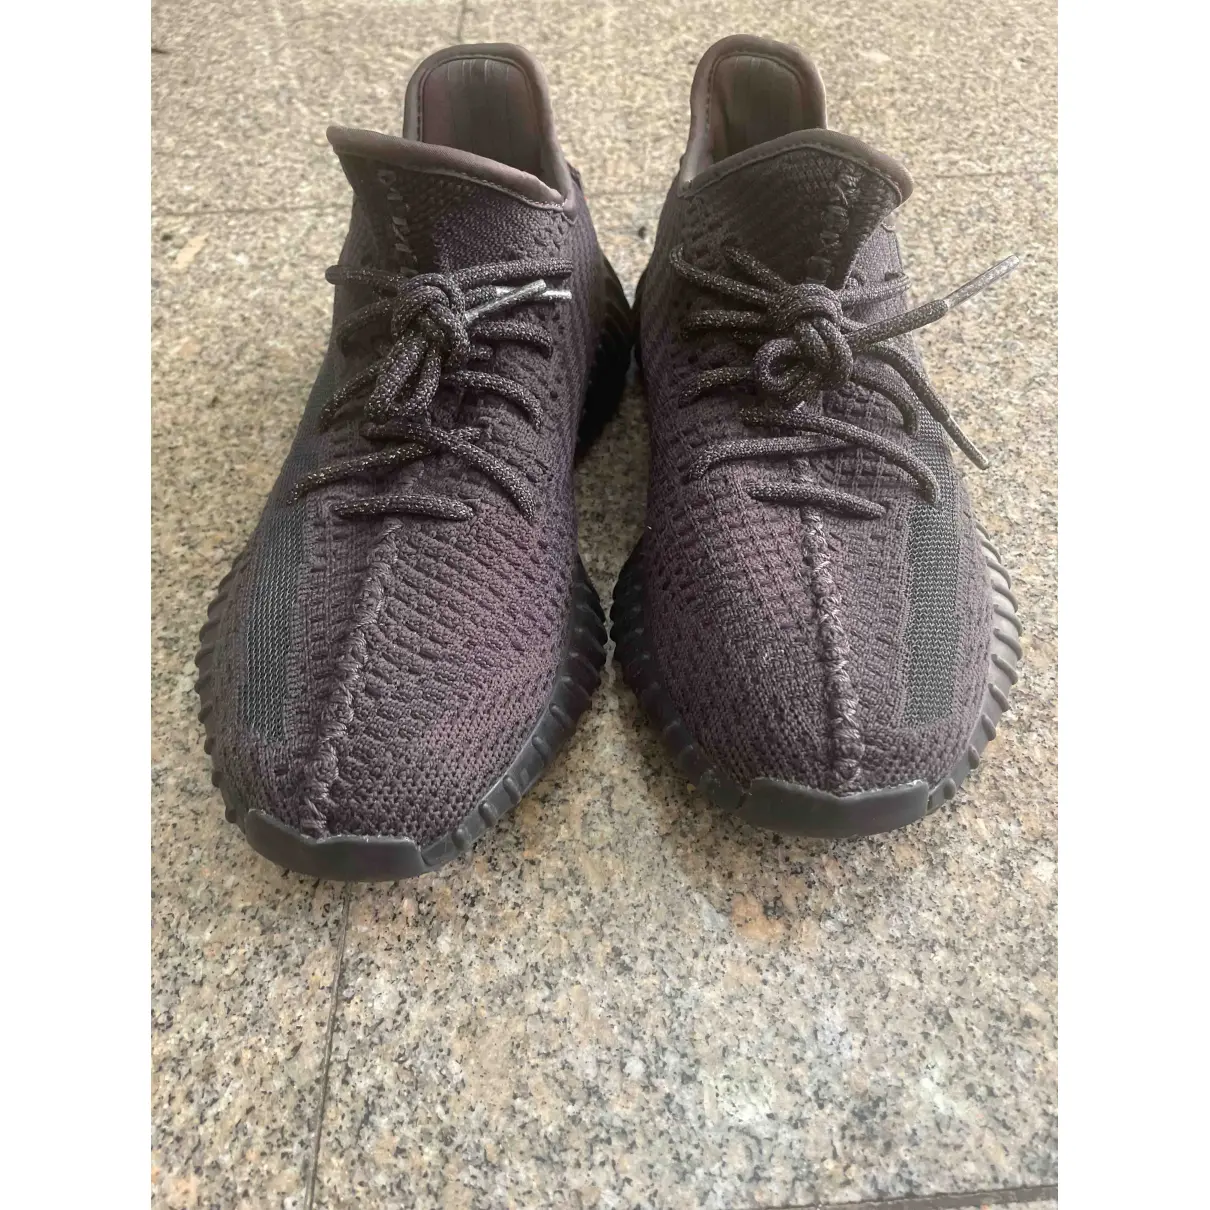 Buy Yeezy x Adidas Boost 350 V2 cloth low trainers online